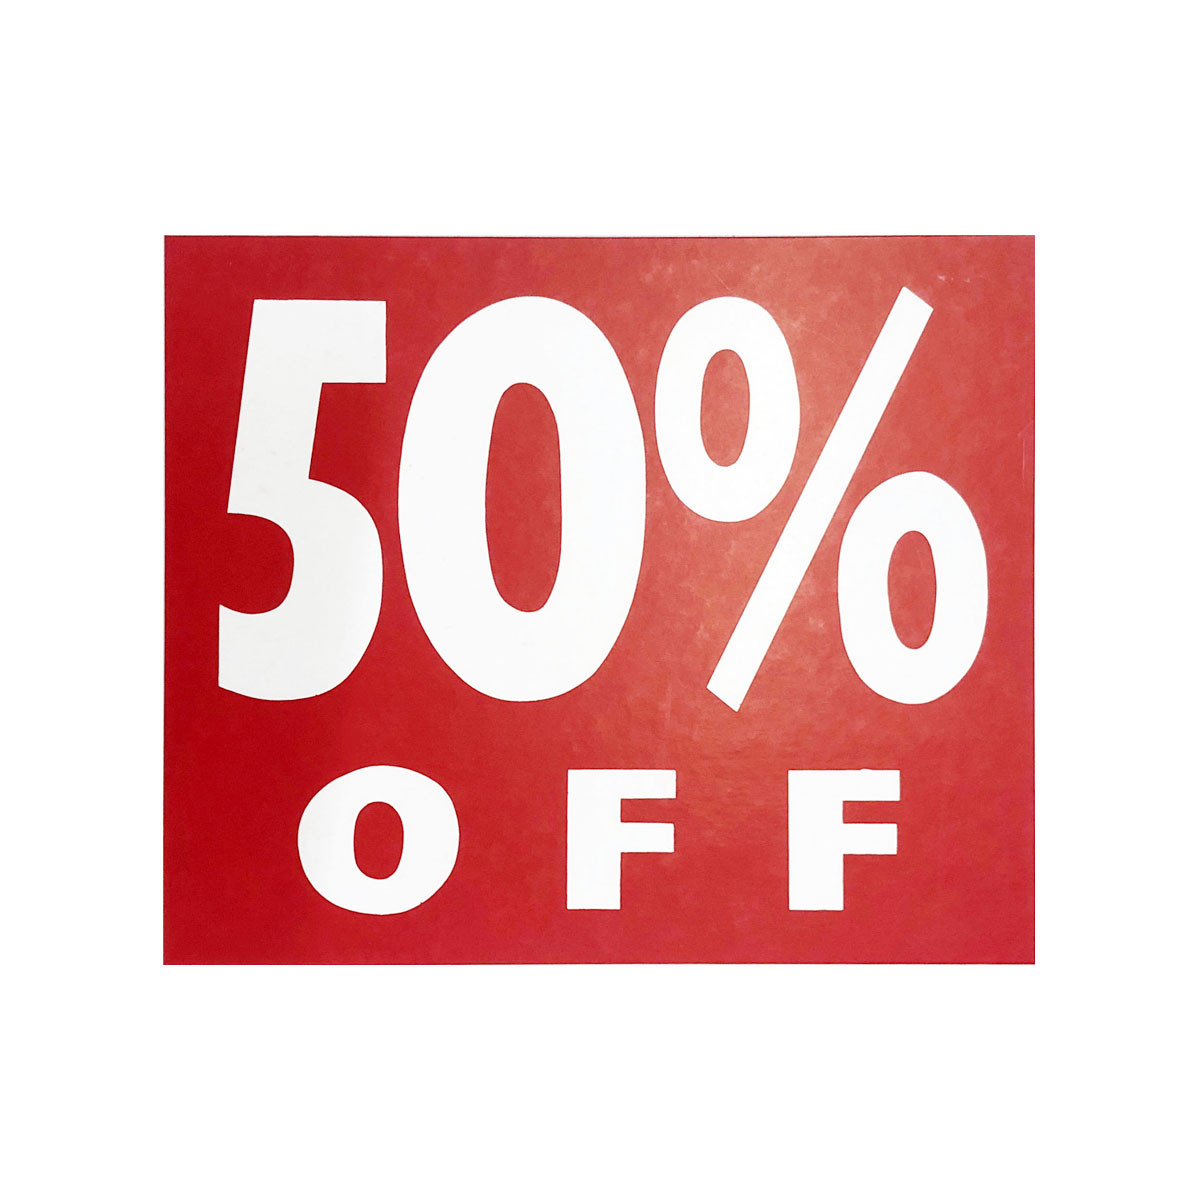 50% SALE CARDS PROMOTIONAL RETAIL SHOP MARKET STALL RAIL DISPLAY CARDS SIGNS, POS, SALE